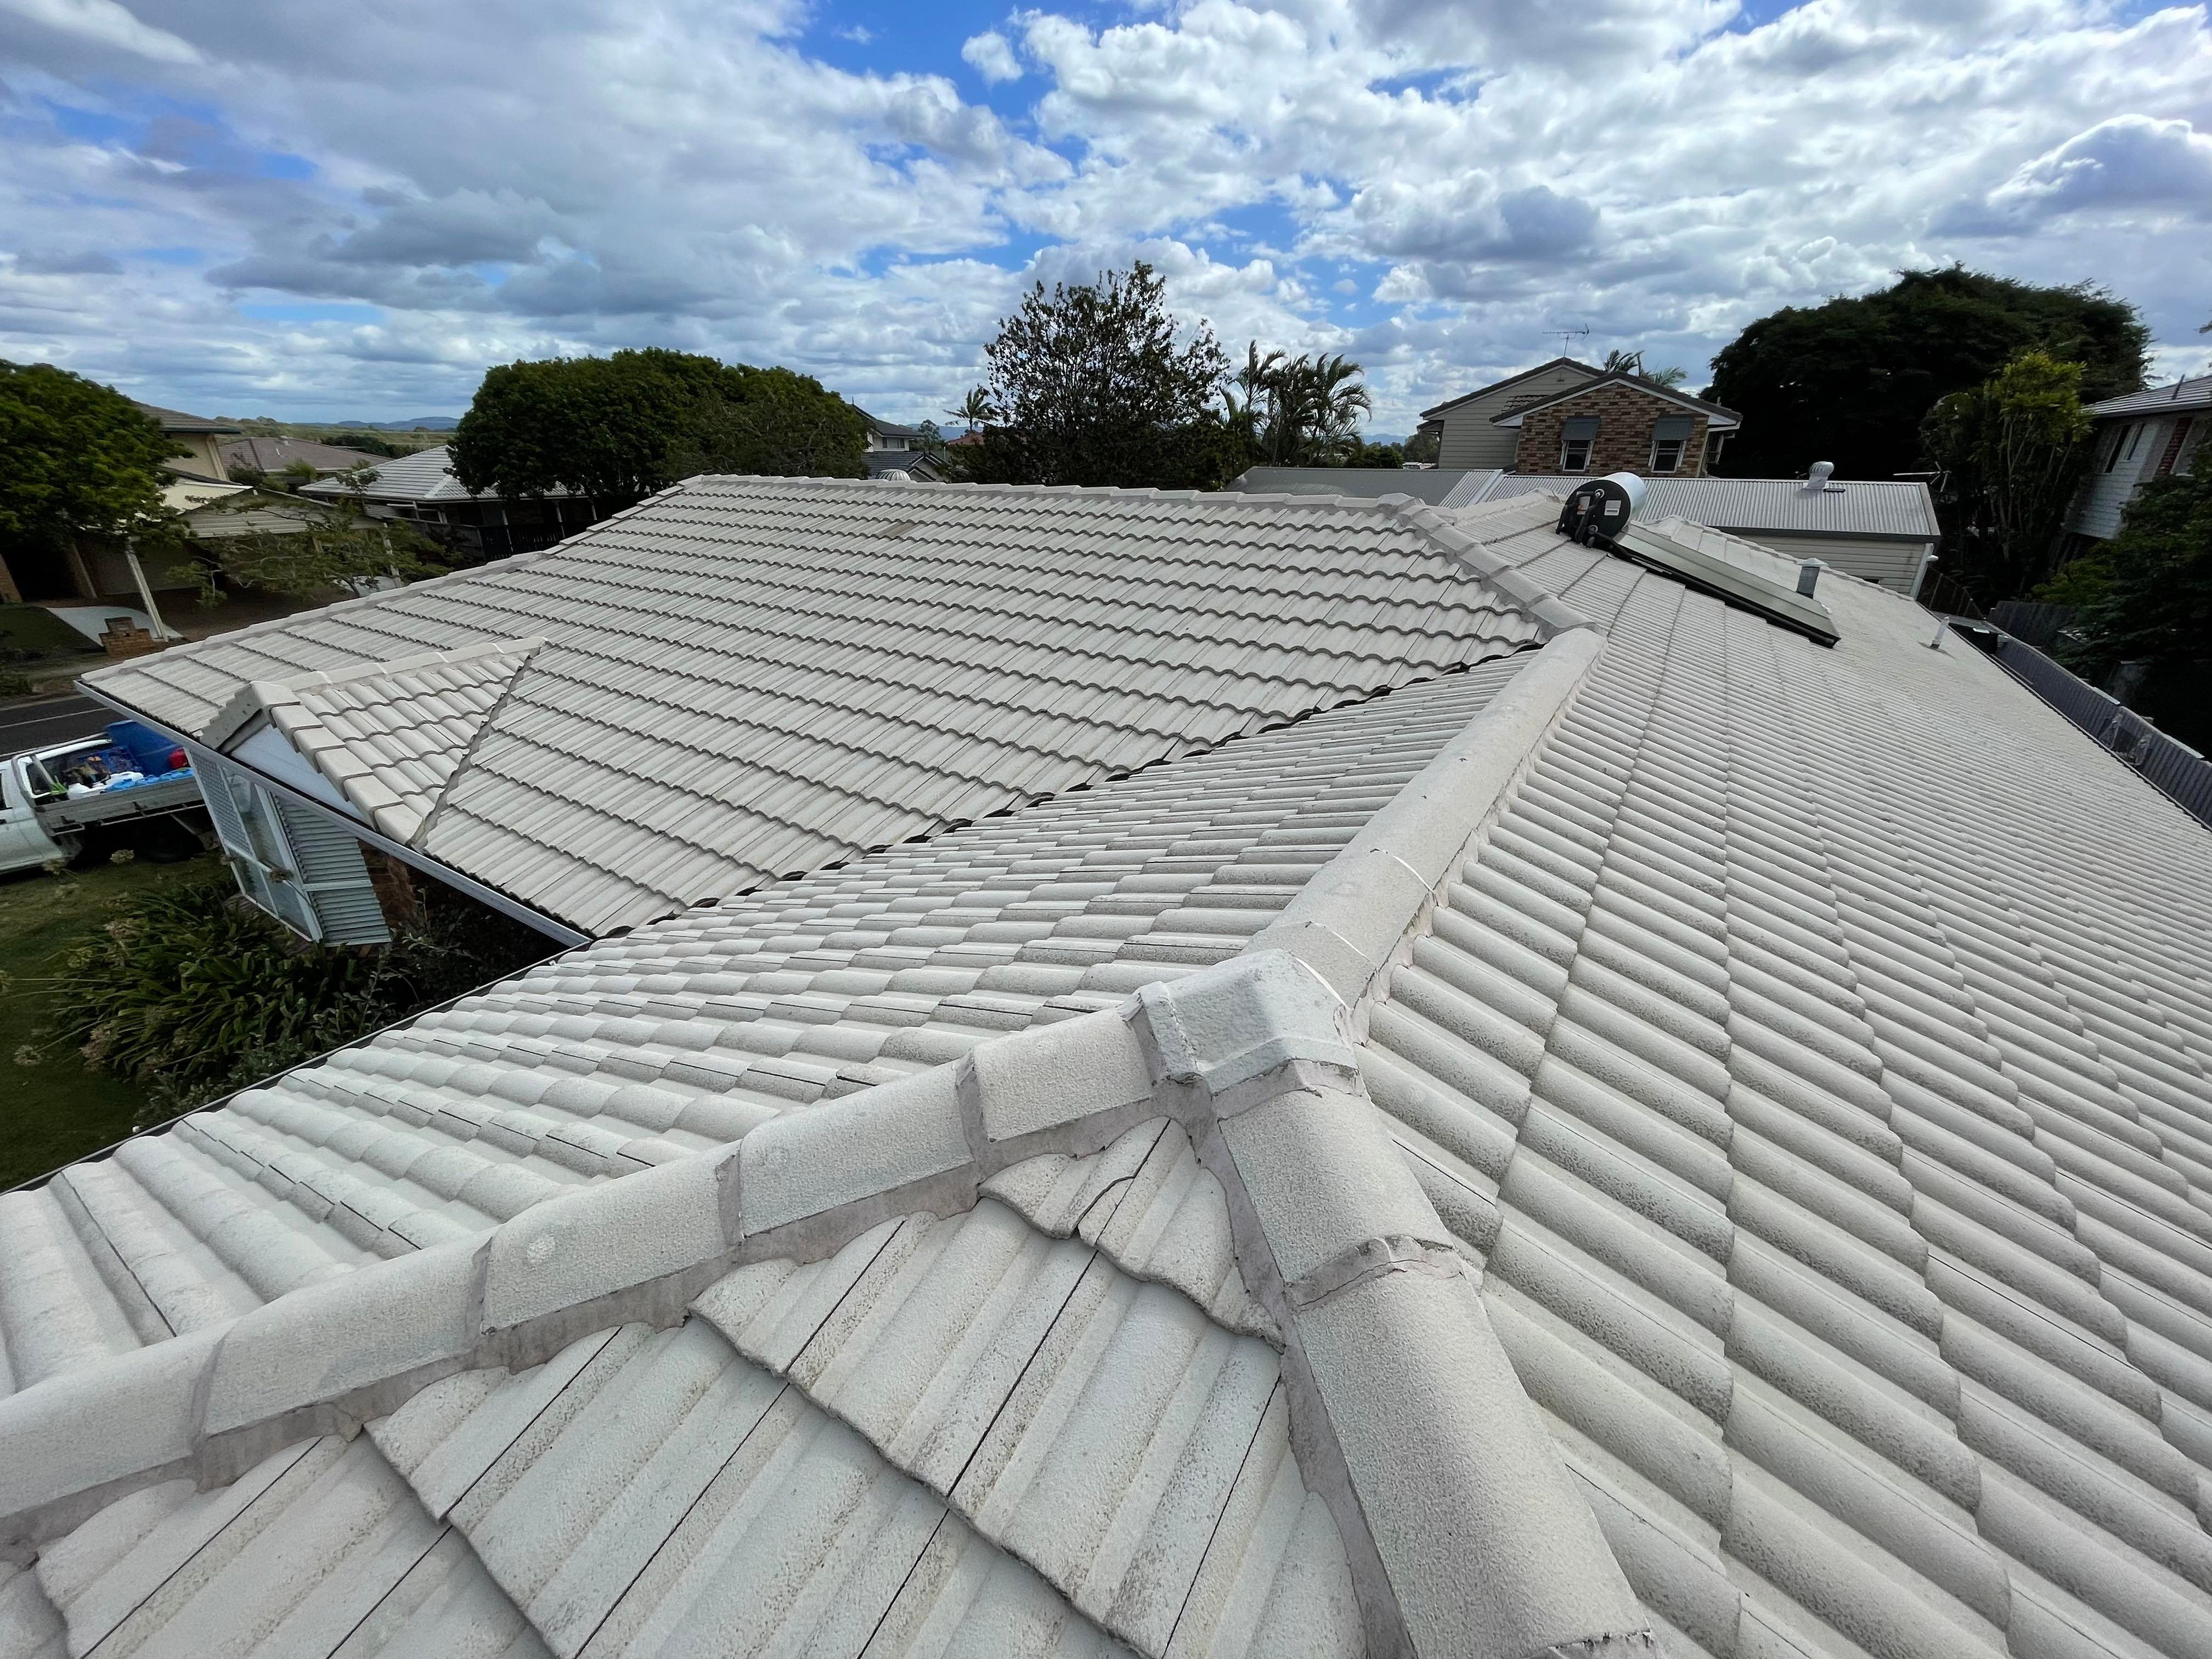 Top Quality Roof and Eaves Cleaning Performed in Bracken Ridge, Queensland